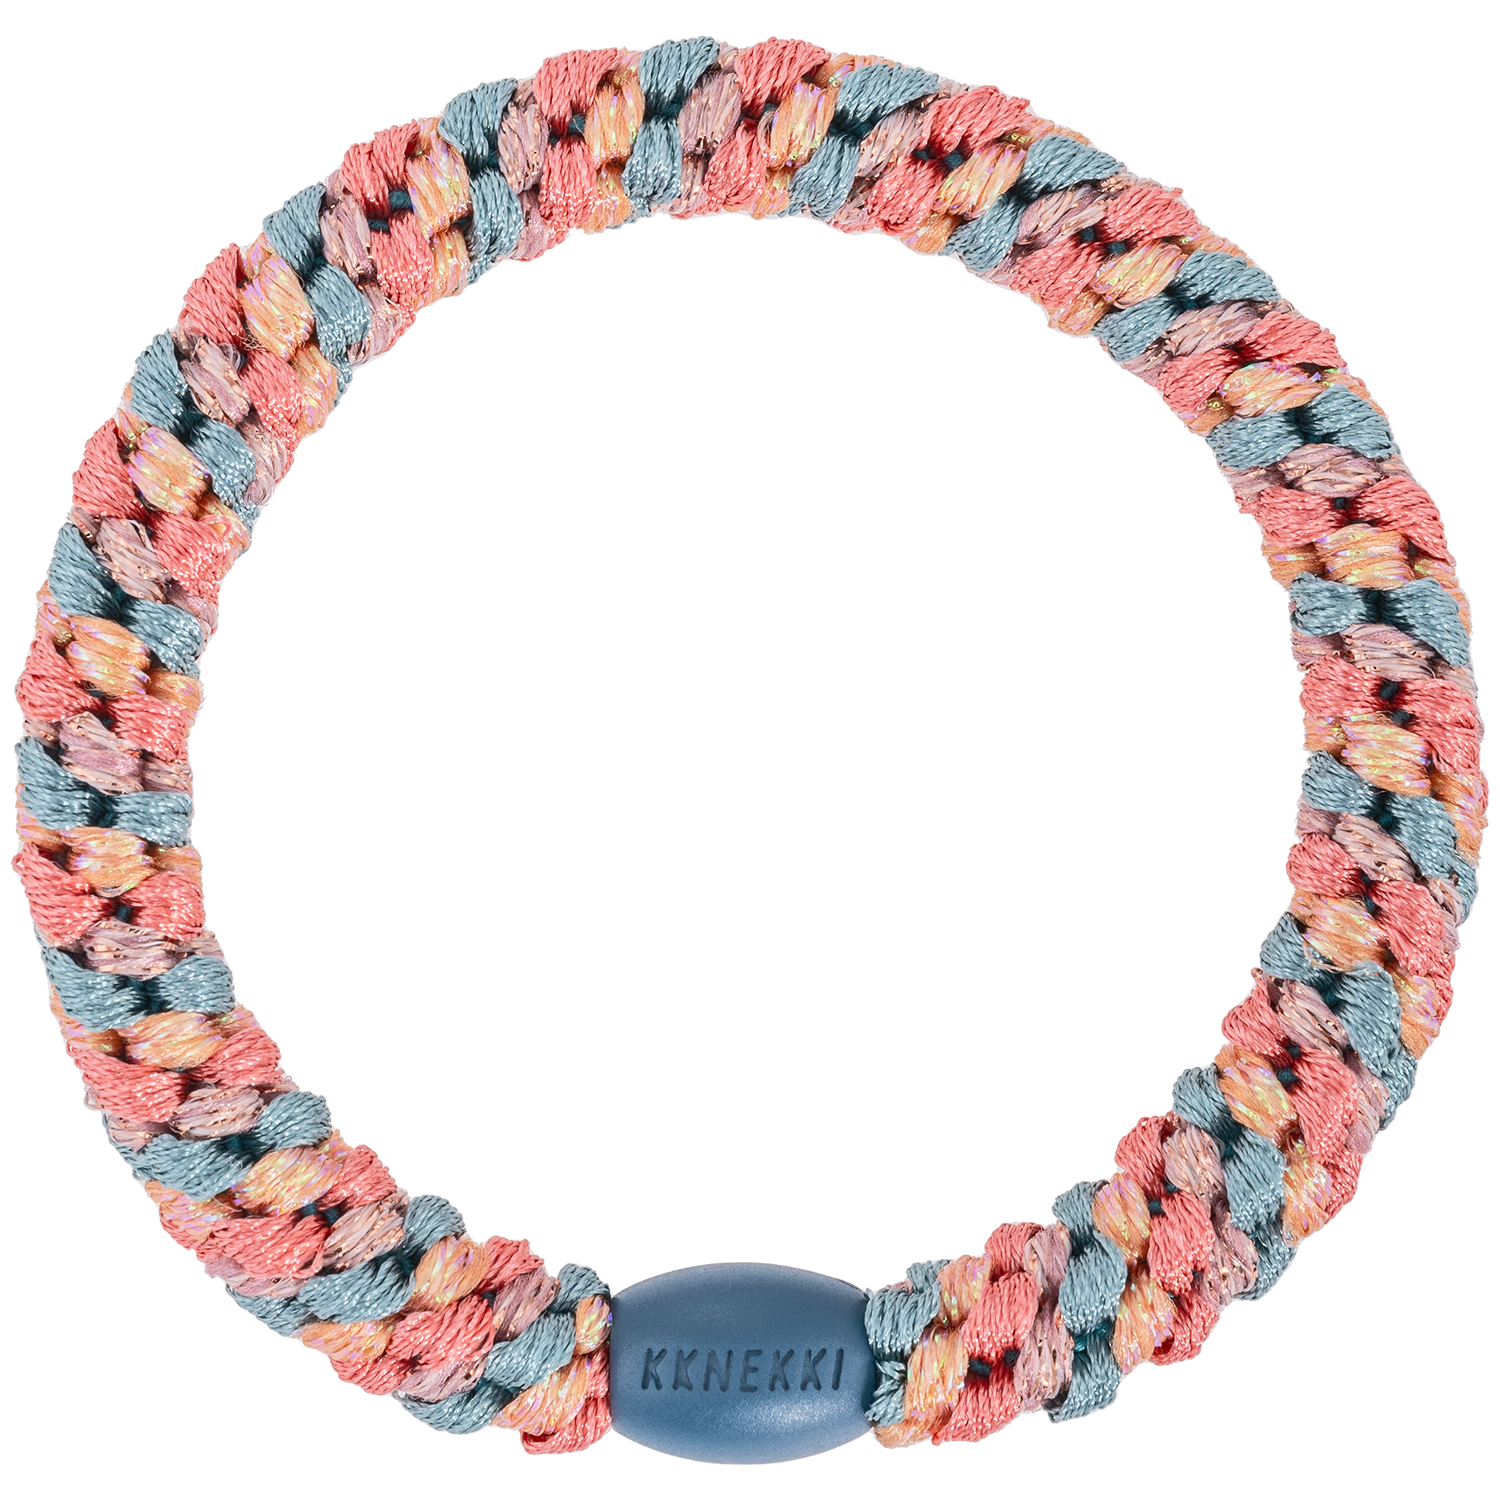 KKnekki Hair Tie - Mix Teal and Pomegranate with Glitter